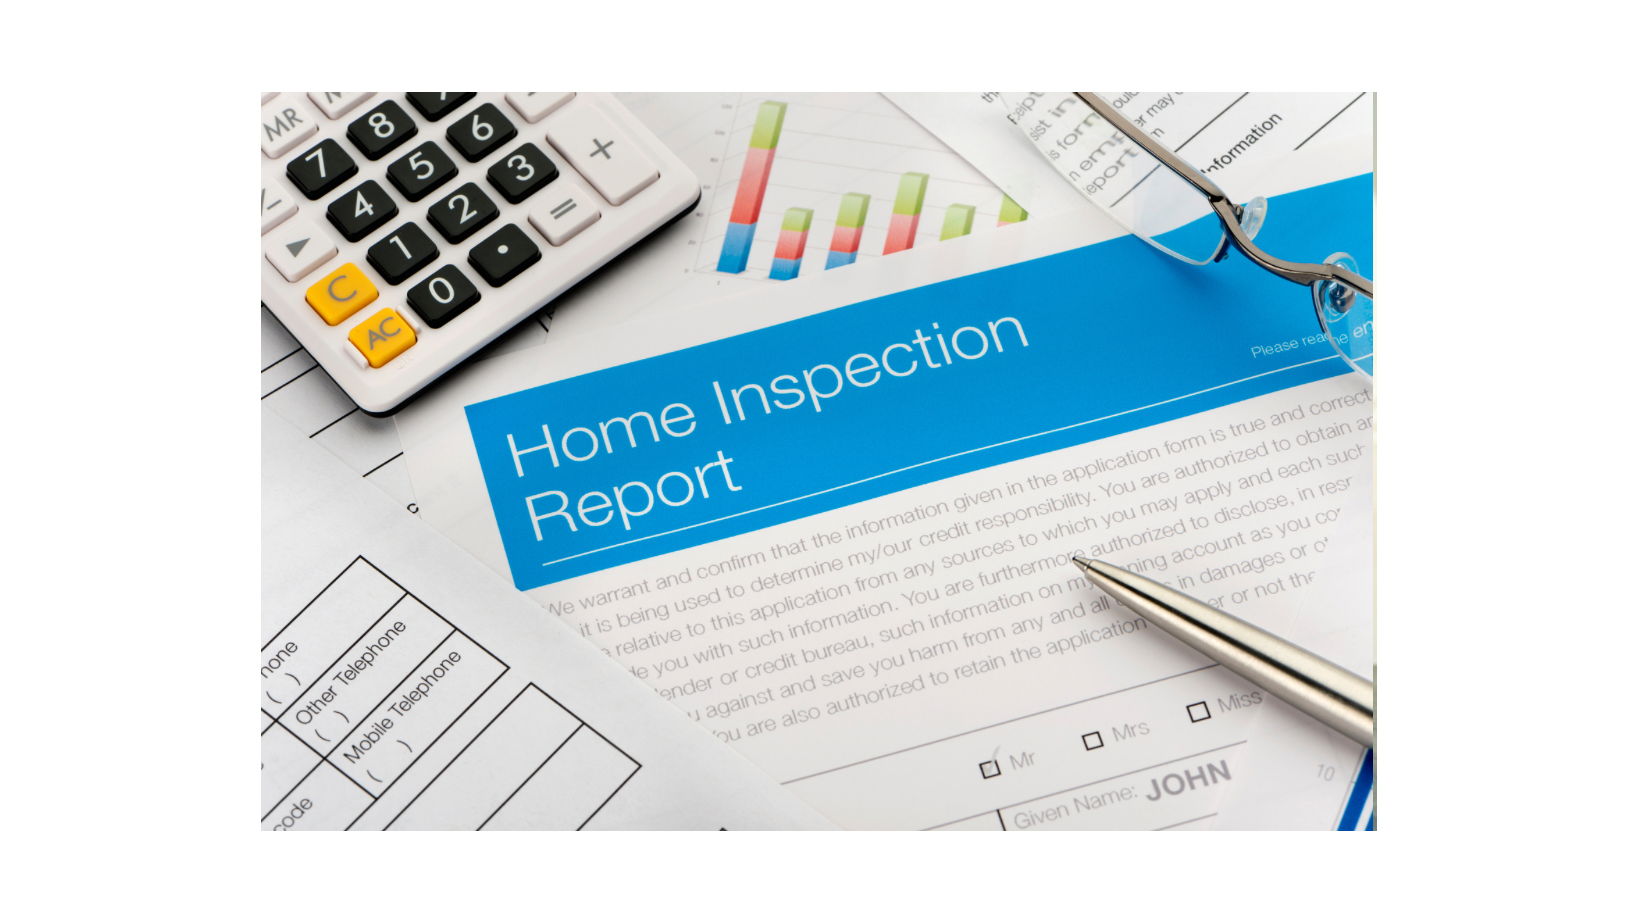 Home inspection are usually part of the disclosure package 